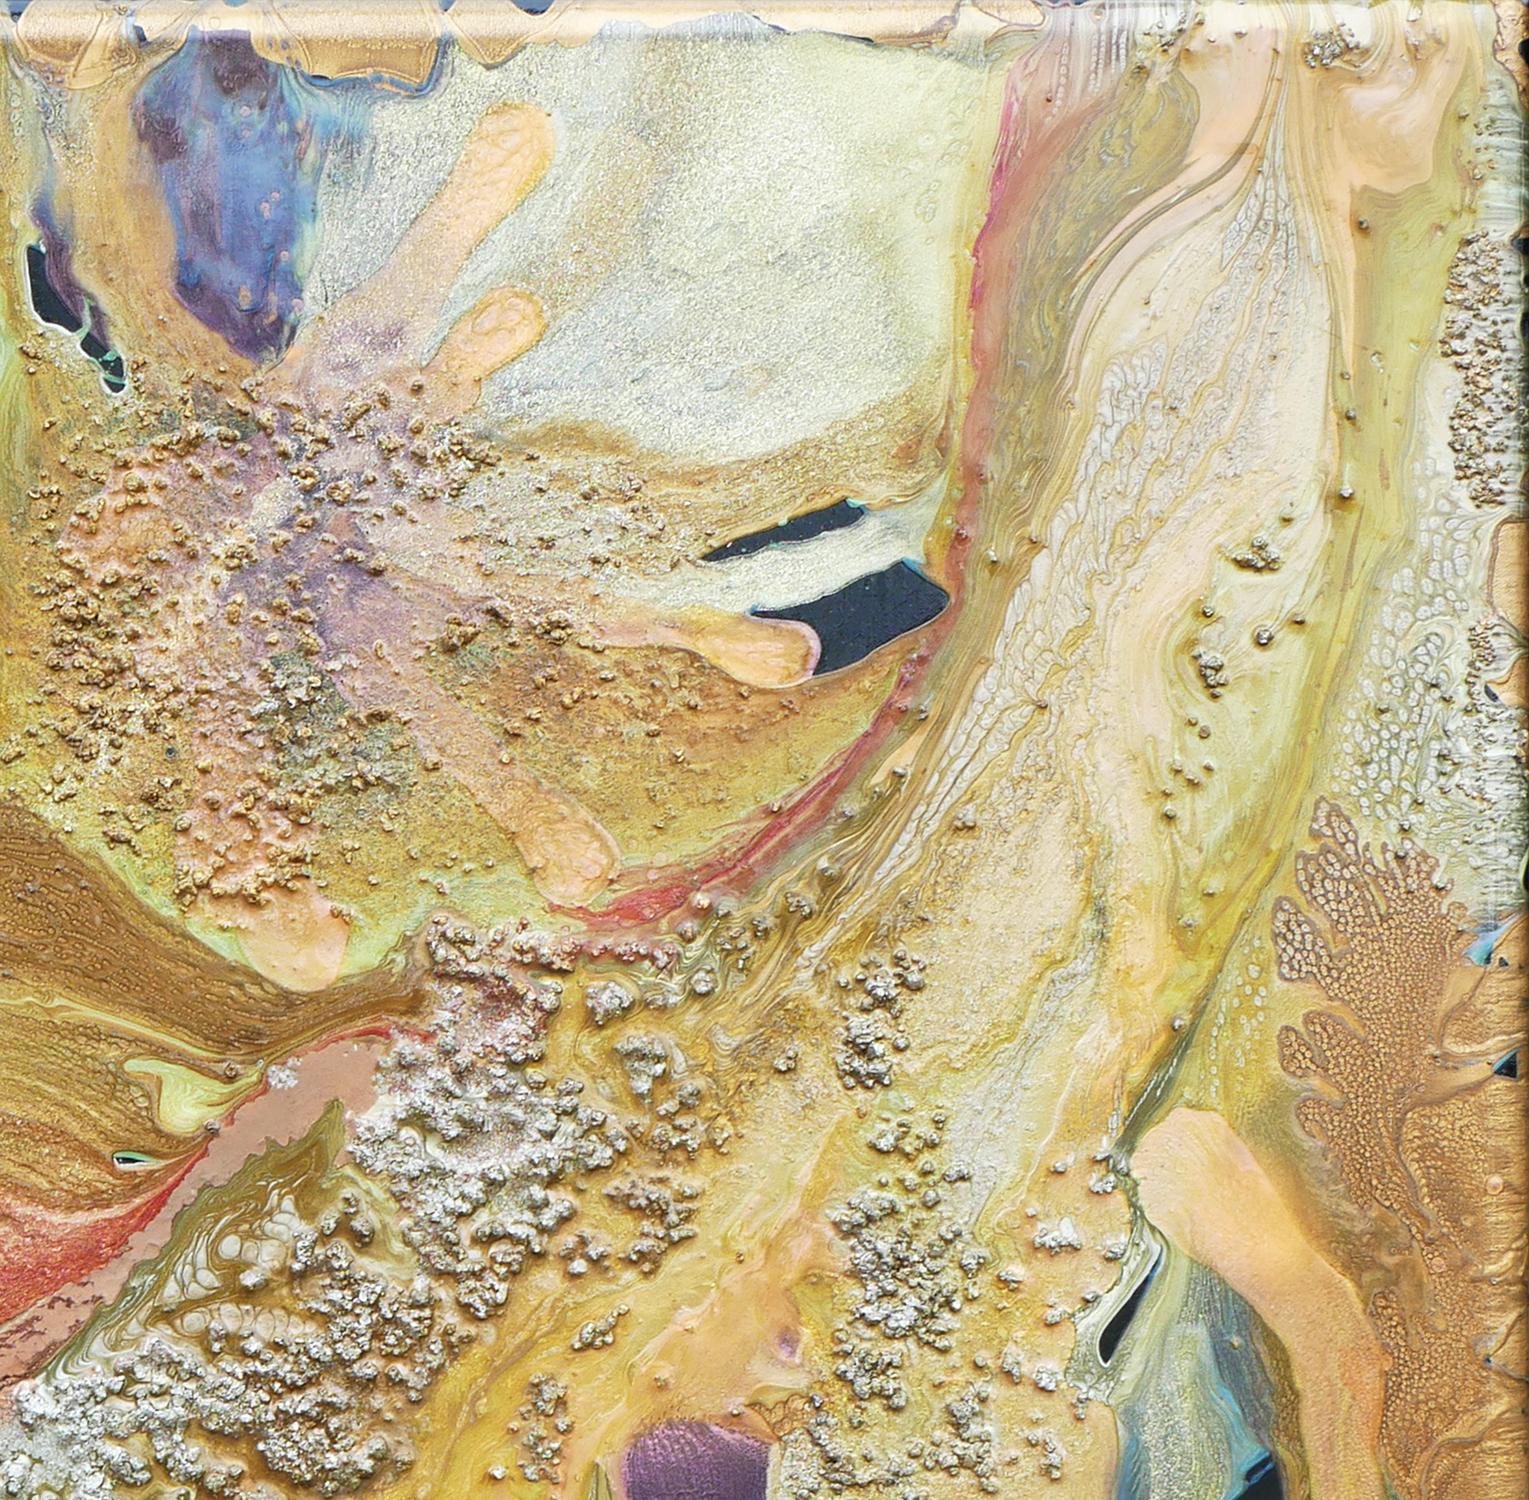 Gold, purple, and green abstract mixed-media painting by Hawaii-based artist, Èlan Vital. The piece depicts a deep, almost three-dimensional painting achieved through layers of pigments. Small stone-like details create texture throughout the